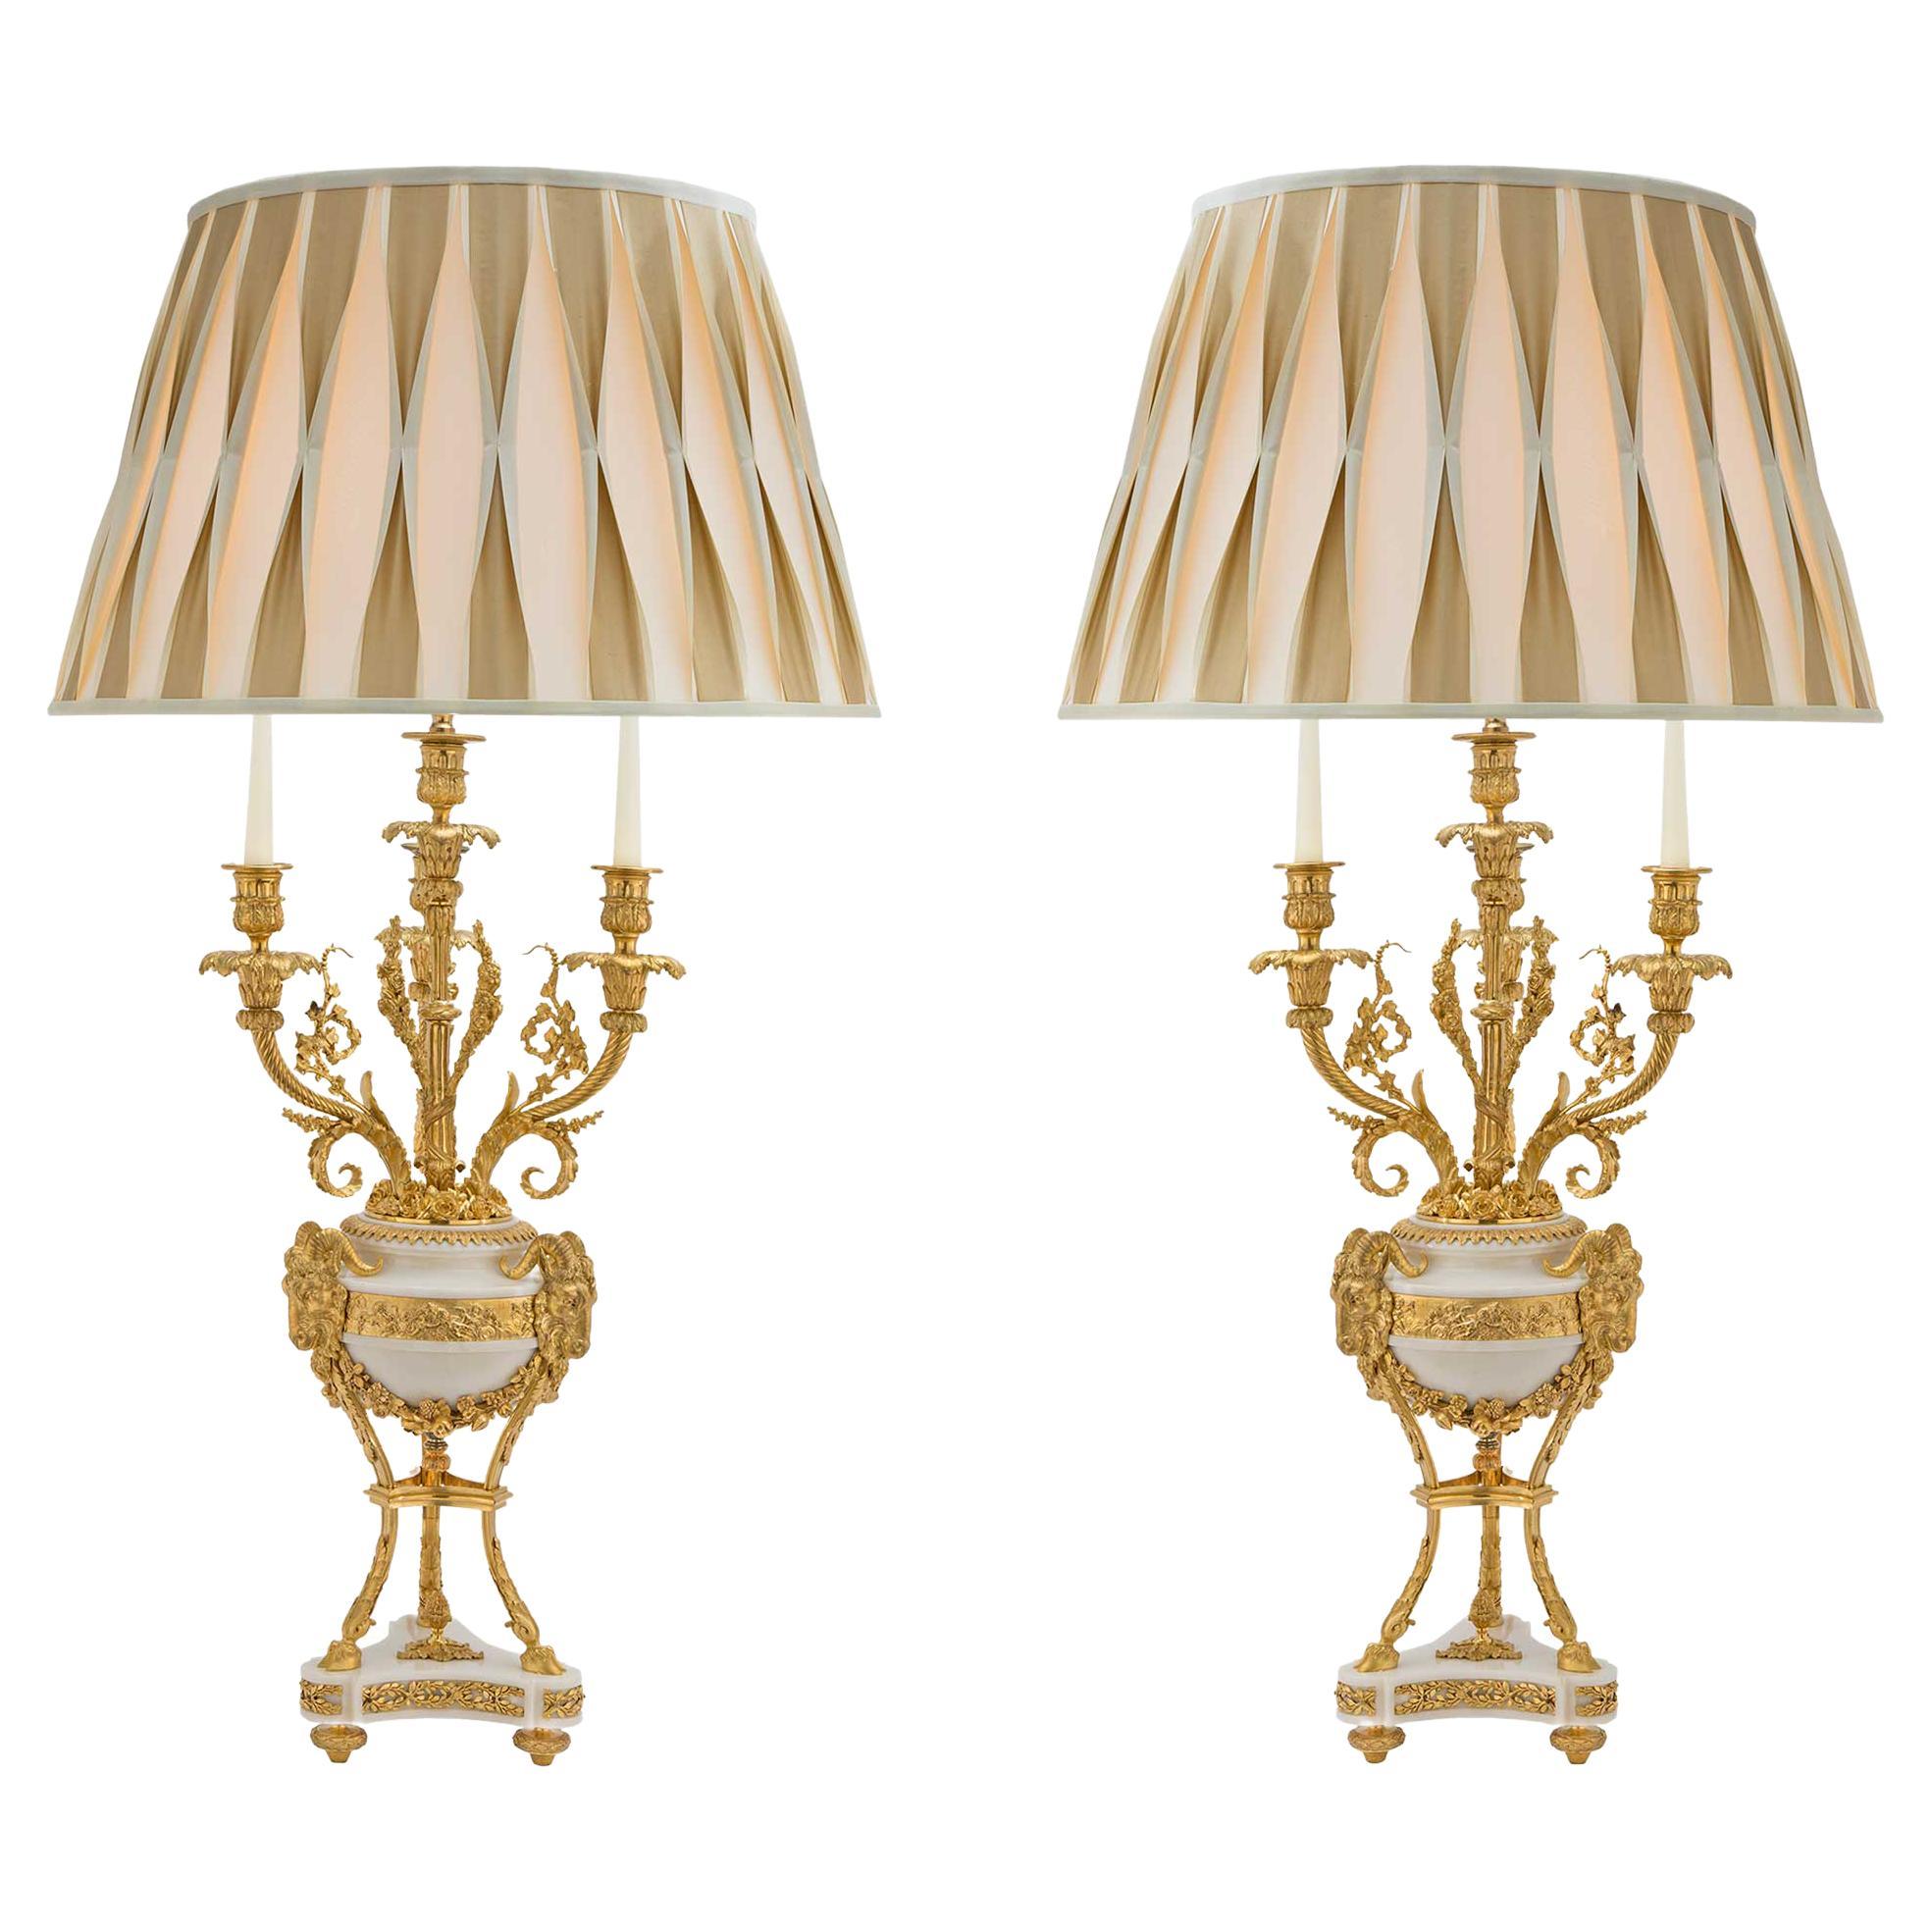 French 19th Century Louis XVI St. Marble and Ormolu Candelabras Lamps